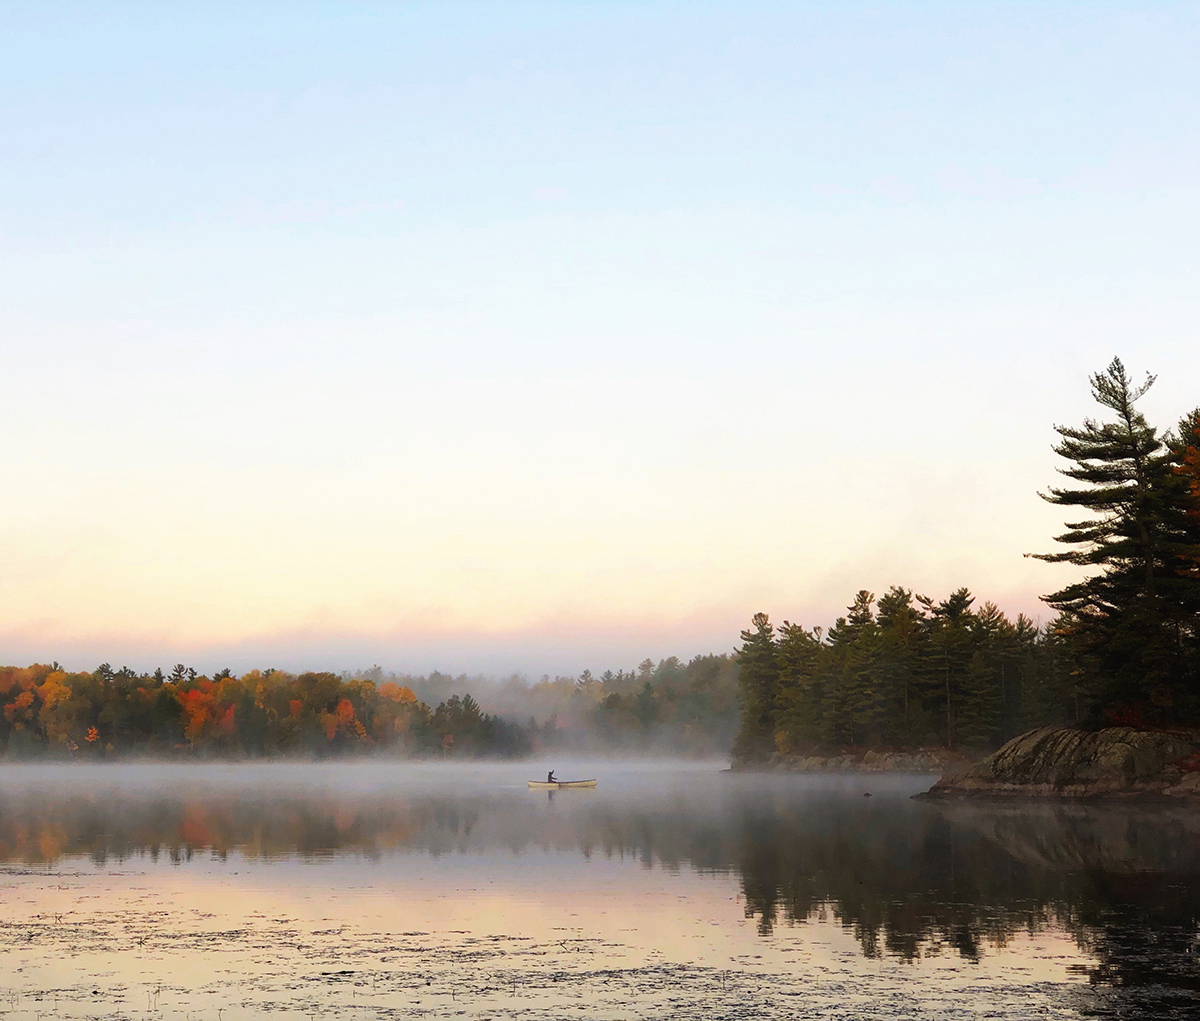 Fall camping guide tip: paddle early in the morning to get a view of the sunrise and misty mornings.

A woman canoes on a misty morning at La Peche Lake in Gatineau Park. 